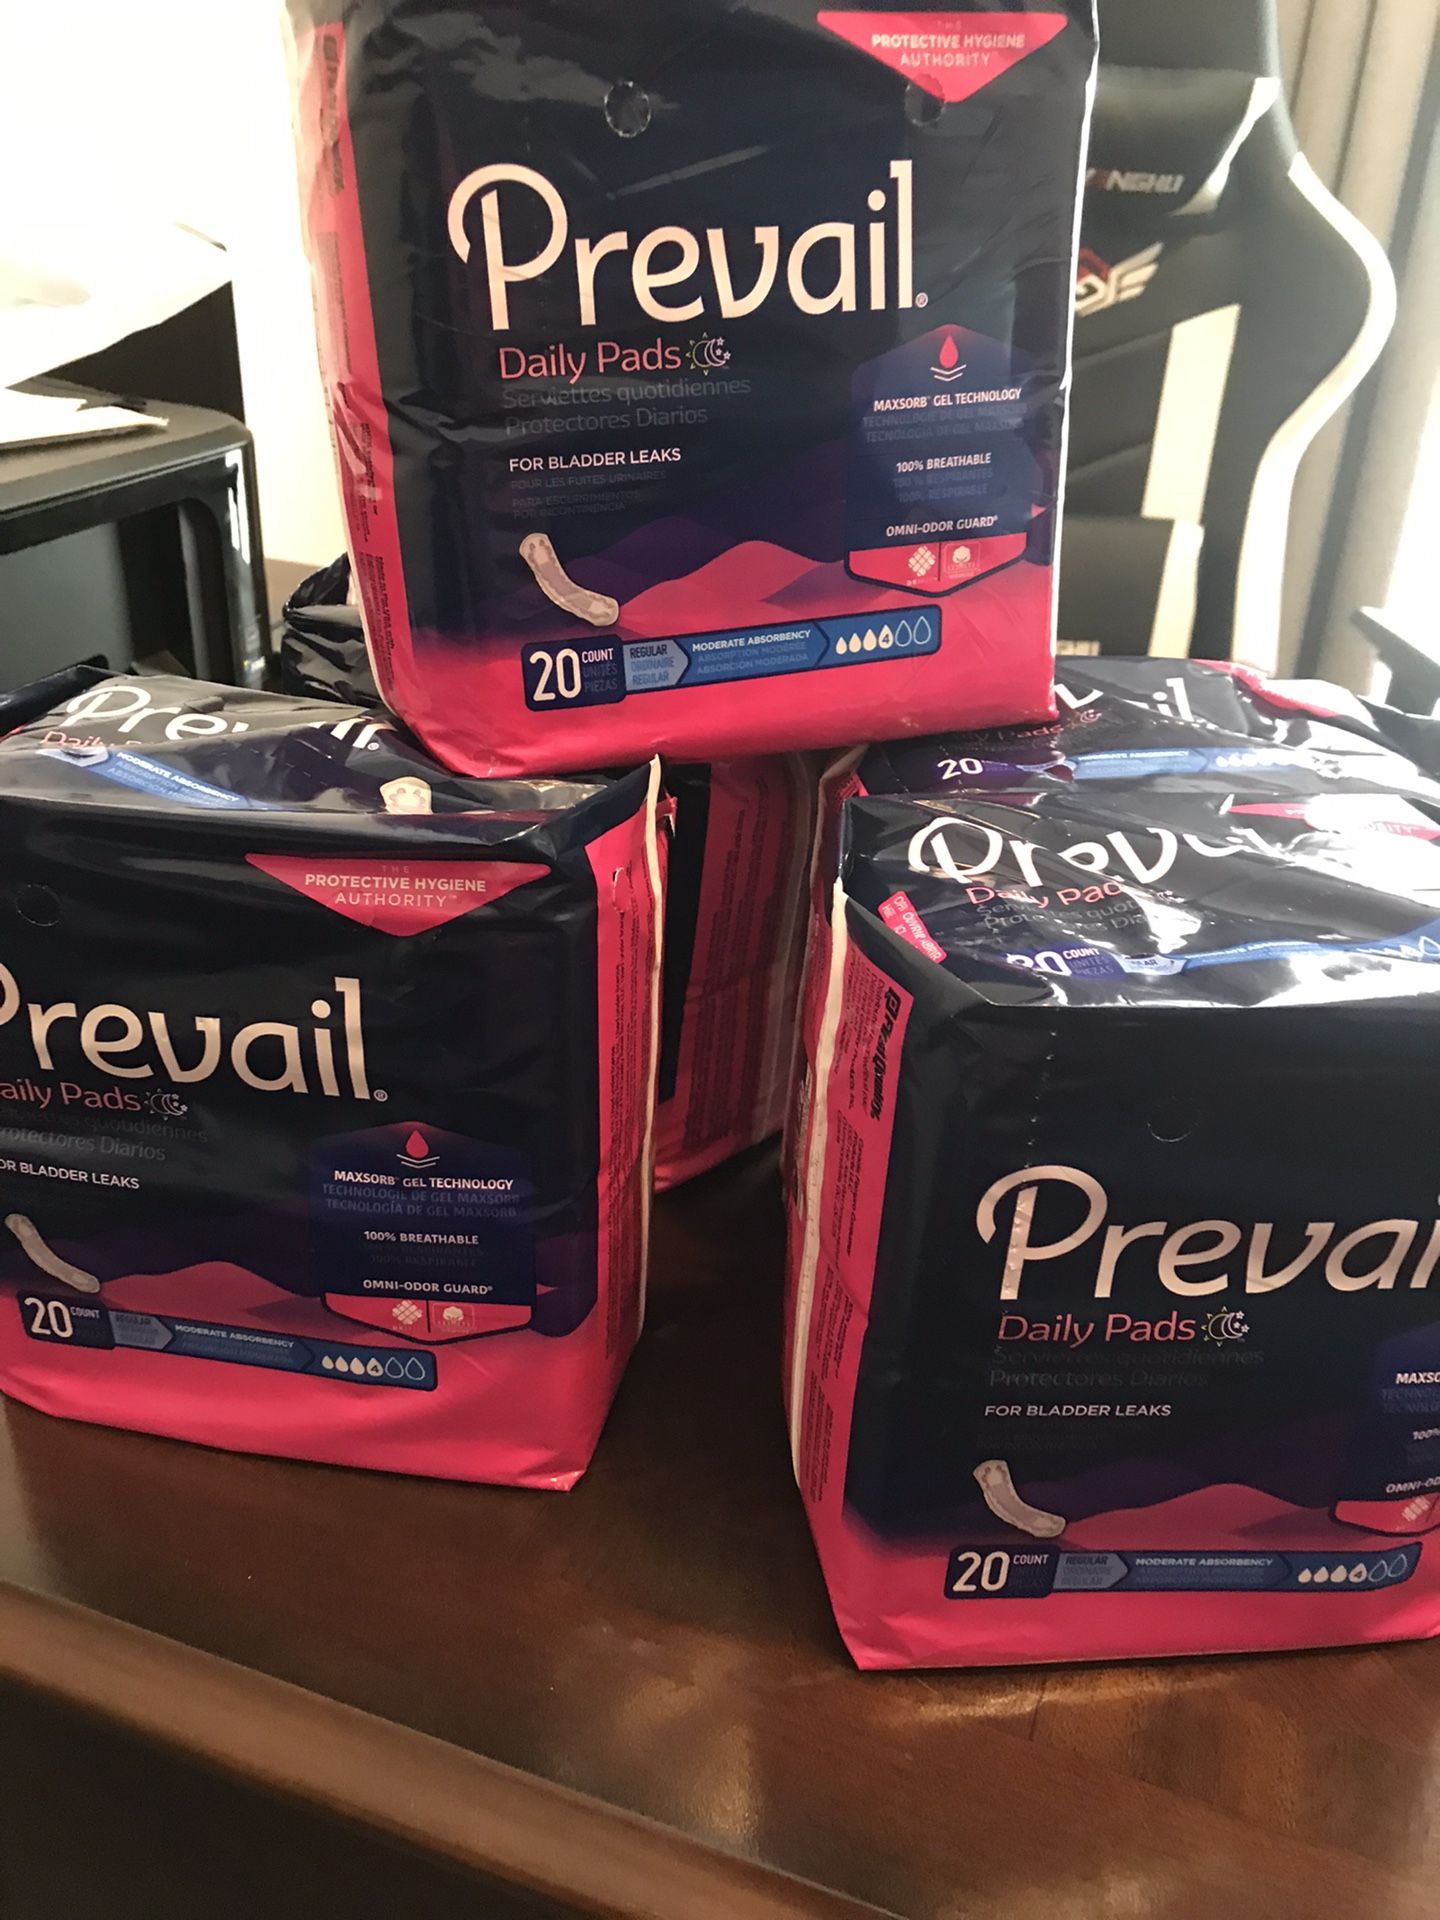 8 Packages Sanitary Napkins All 8 For $ 20.00